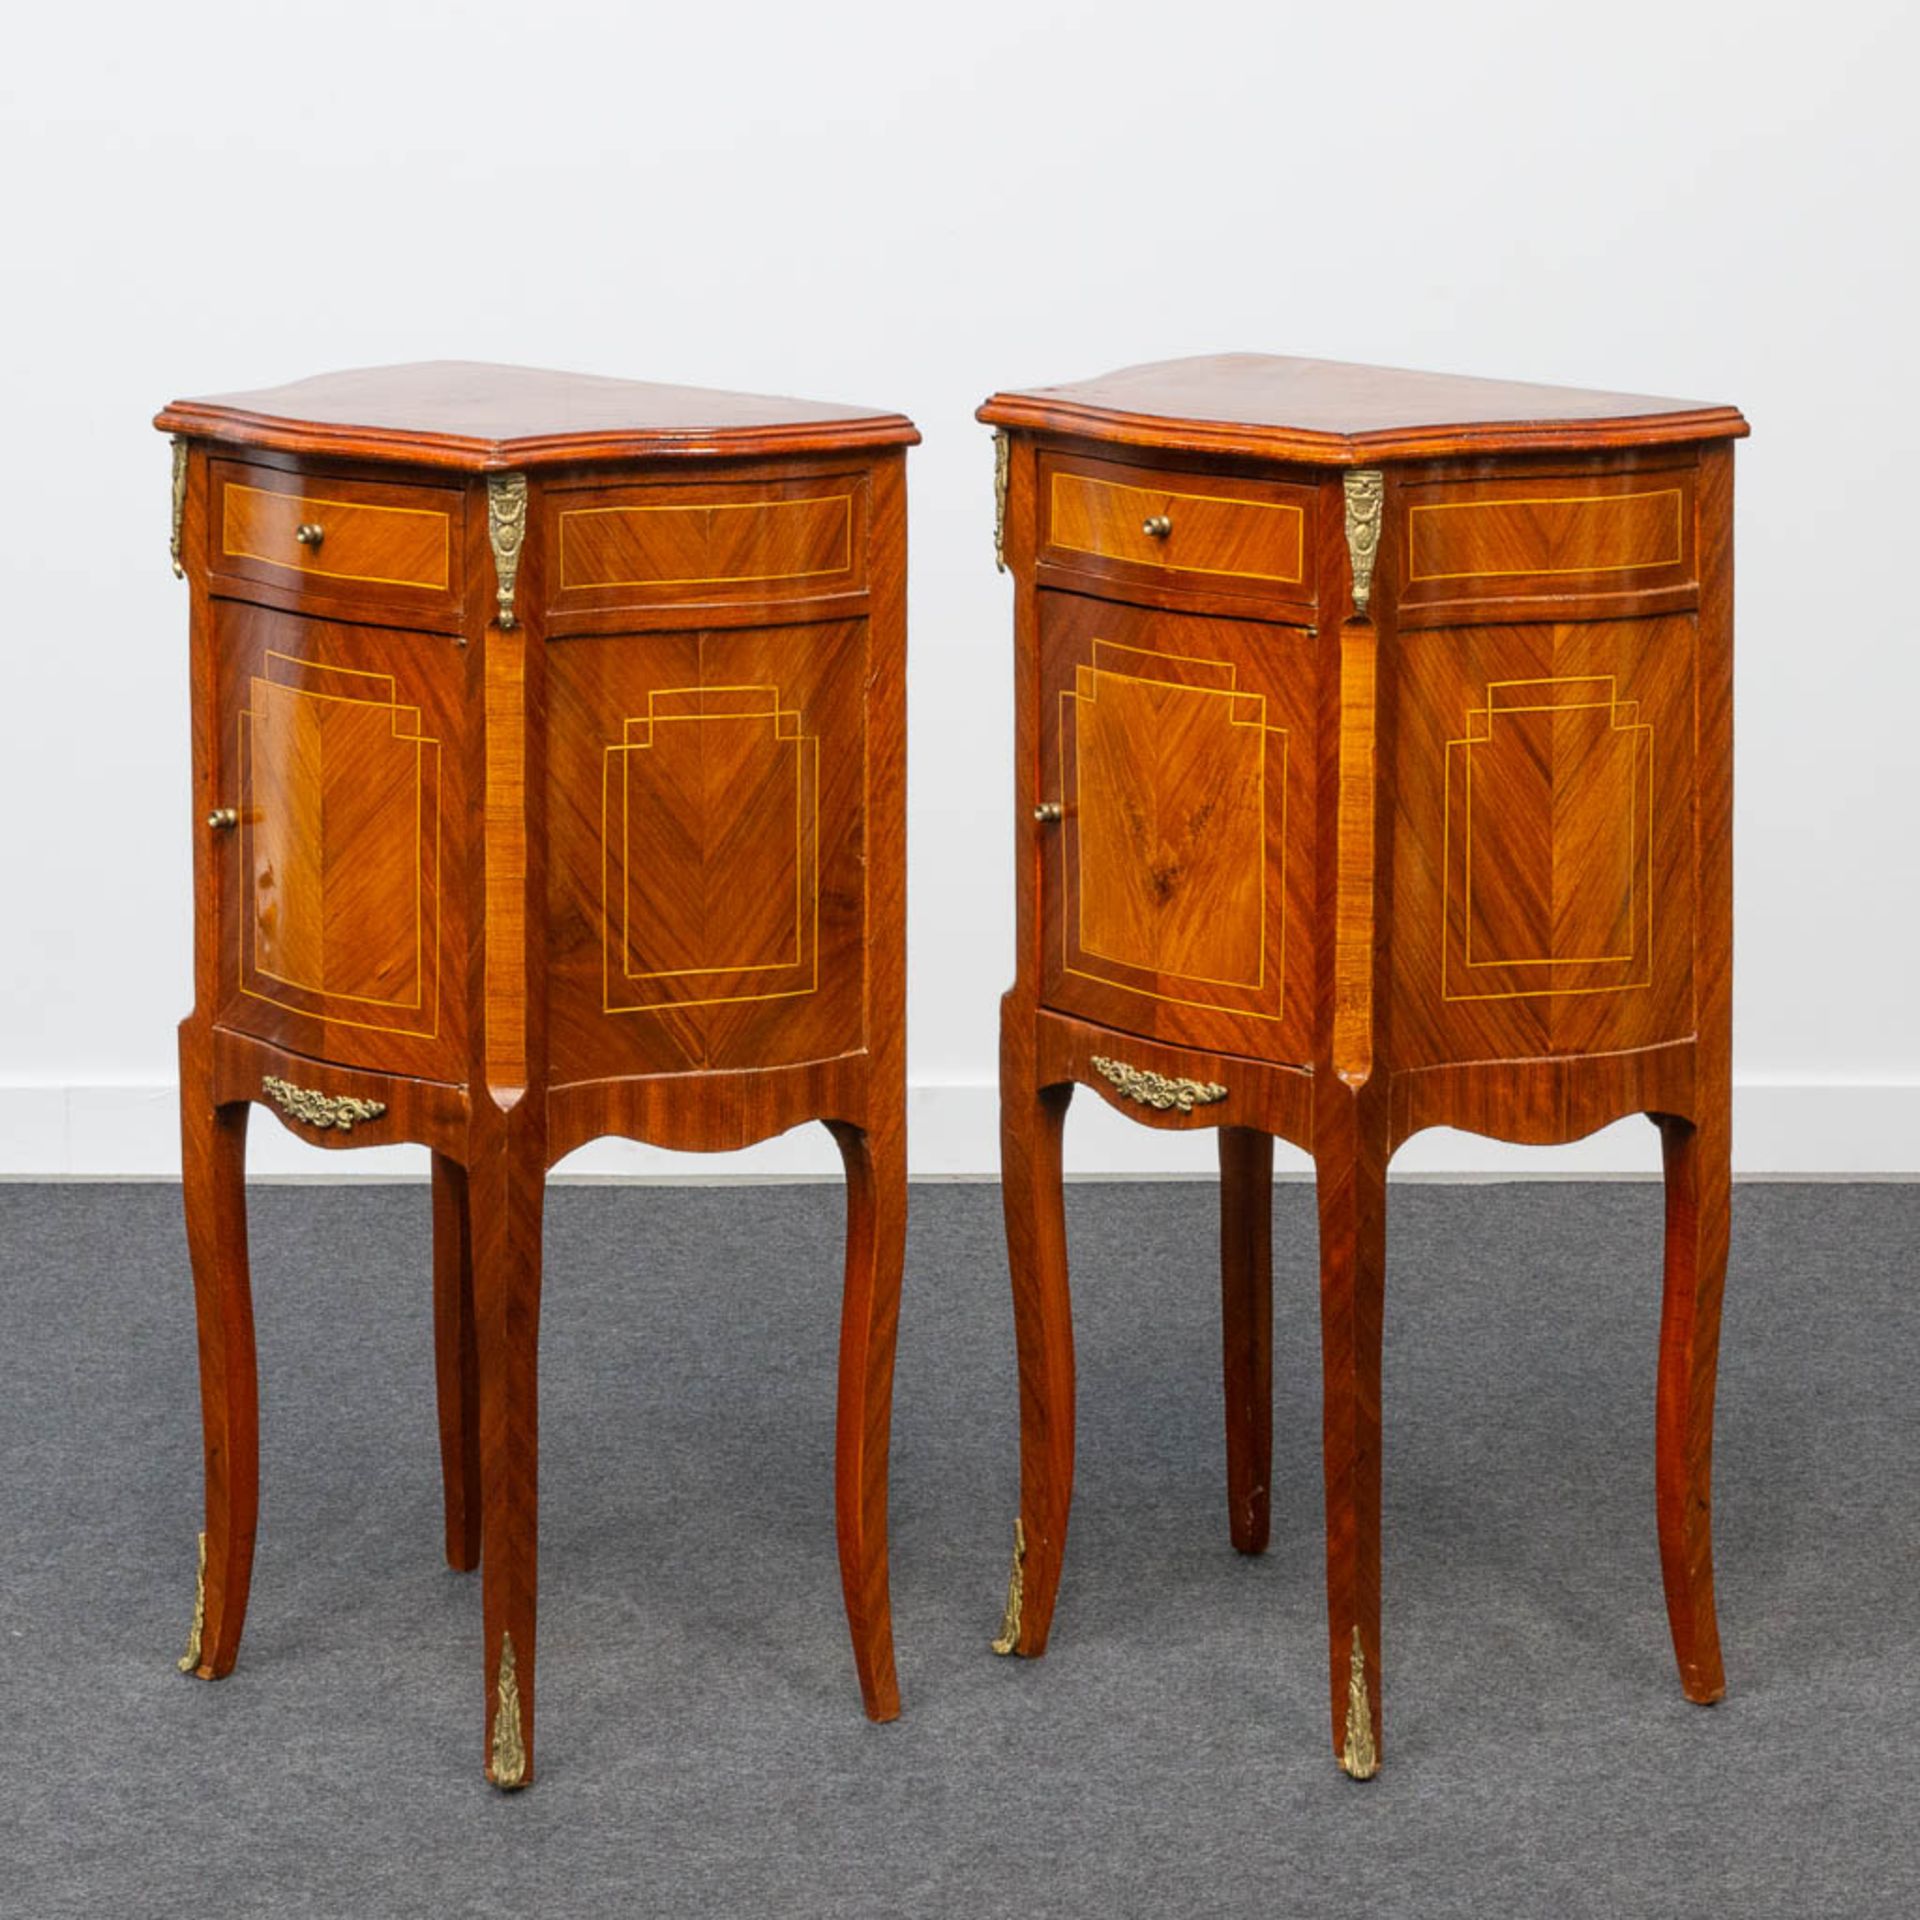 A pair of bronze mounted nightstands, inlaid with marquetry. Second half of the 20th century. - Image 4 of 22